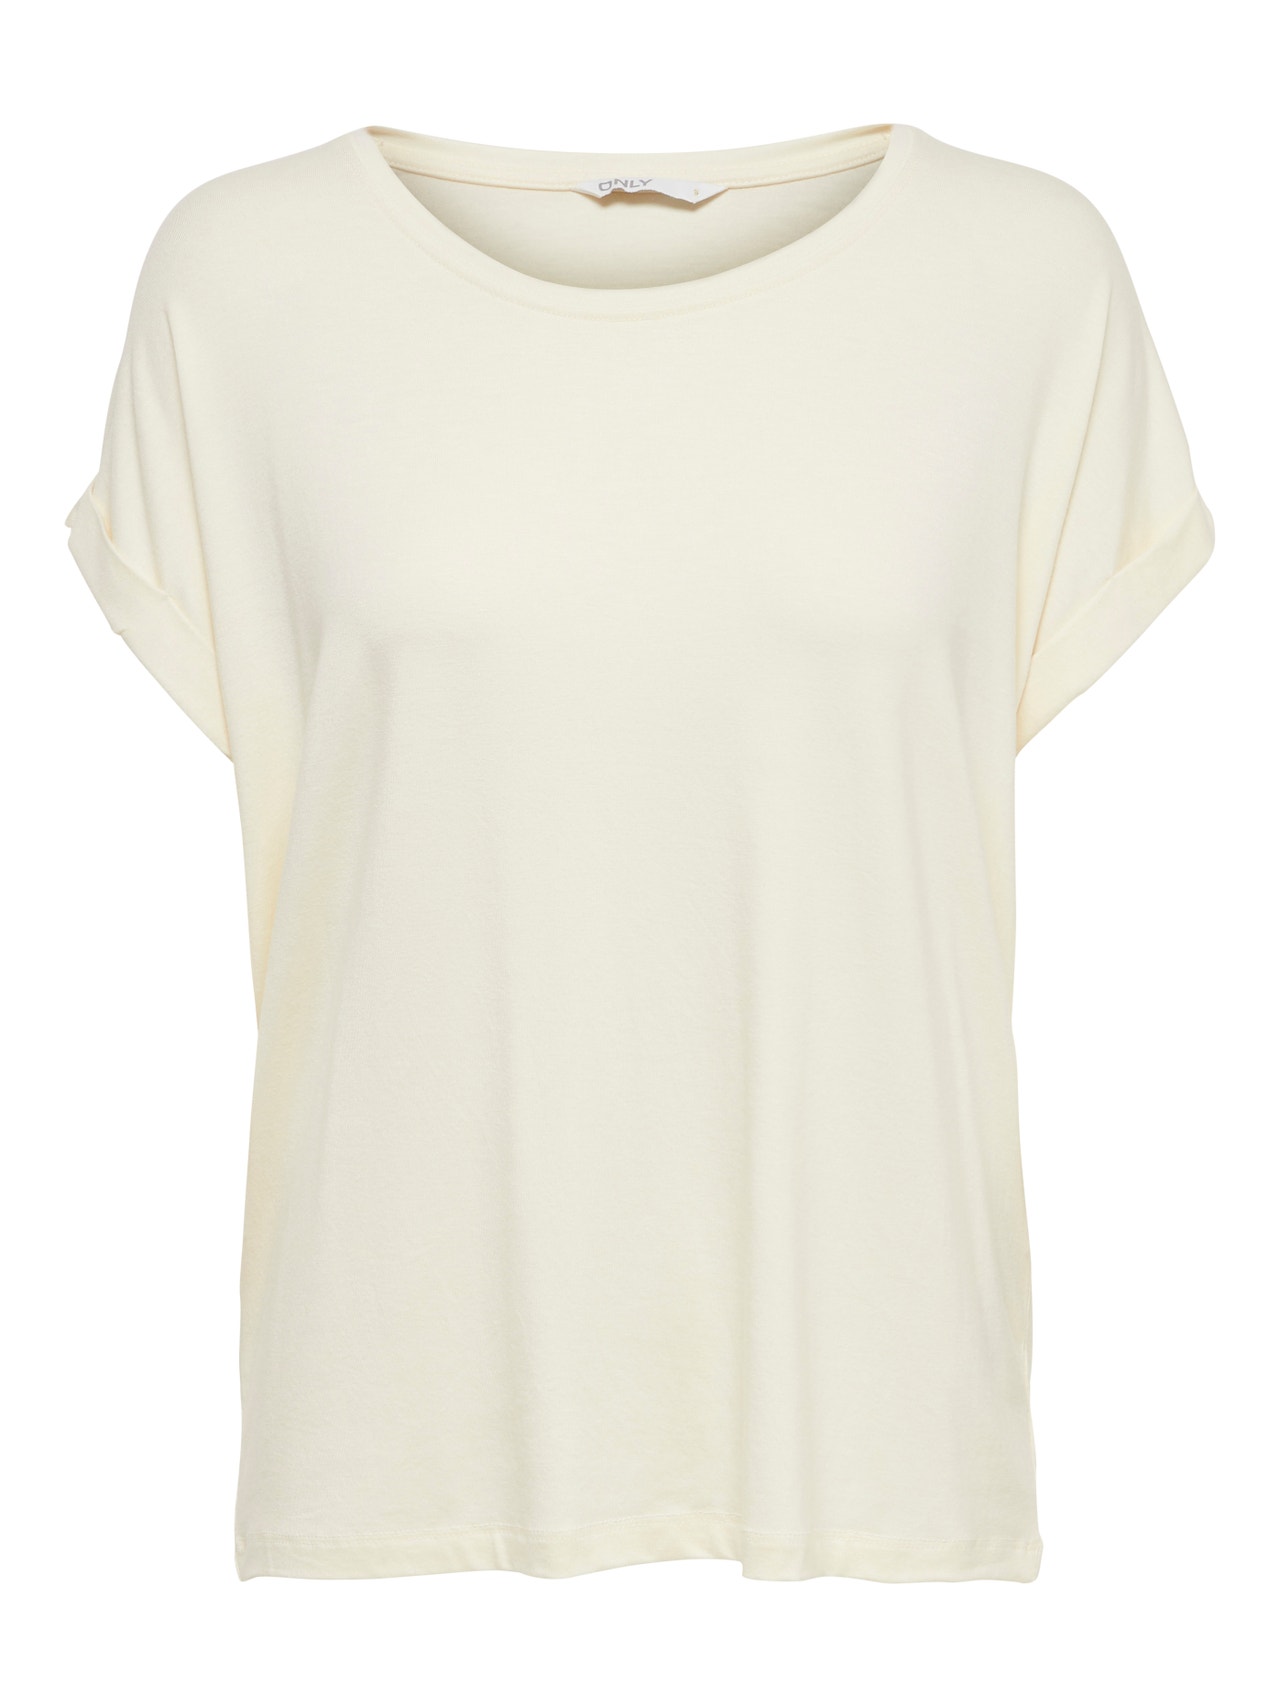 ONLY Ample T-Shirt -Antique White - 15106662